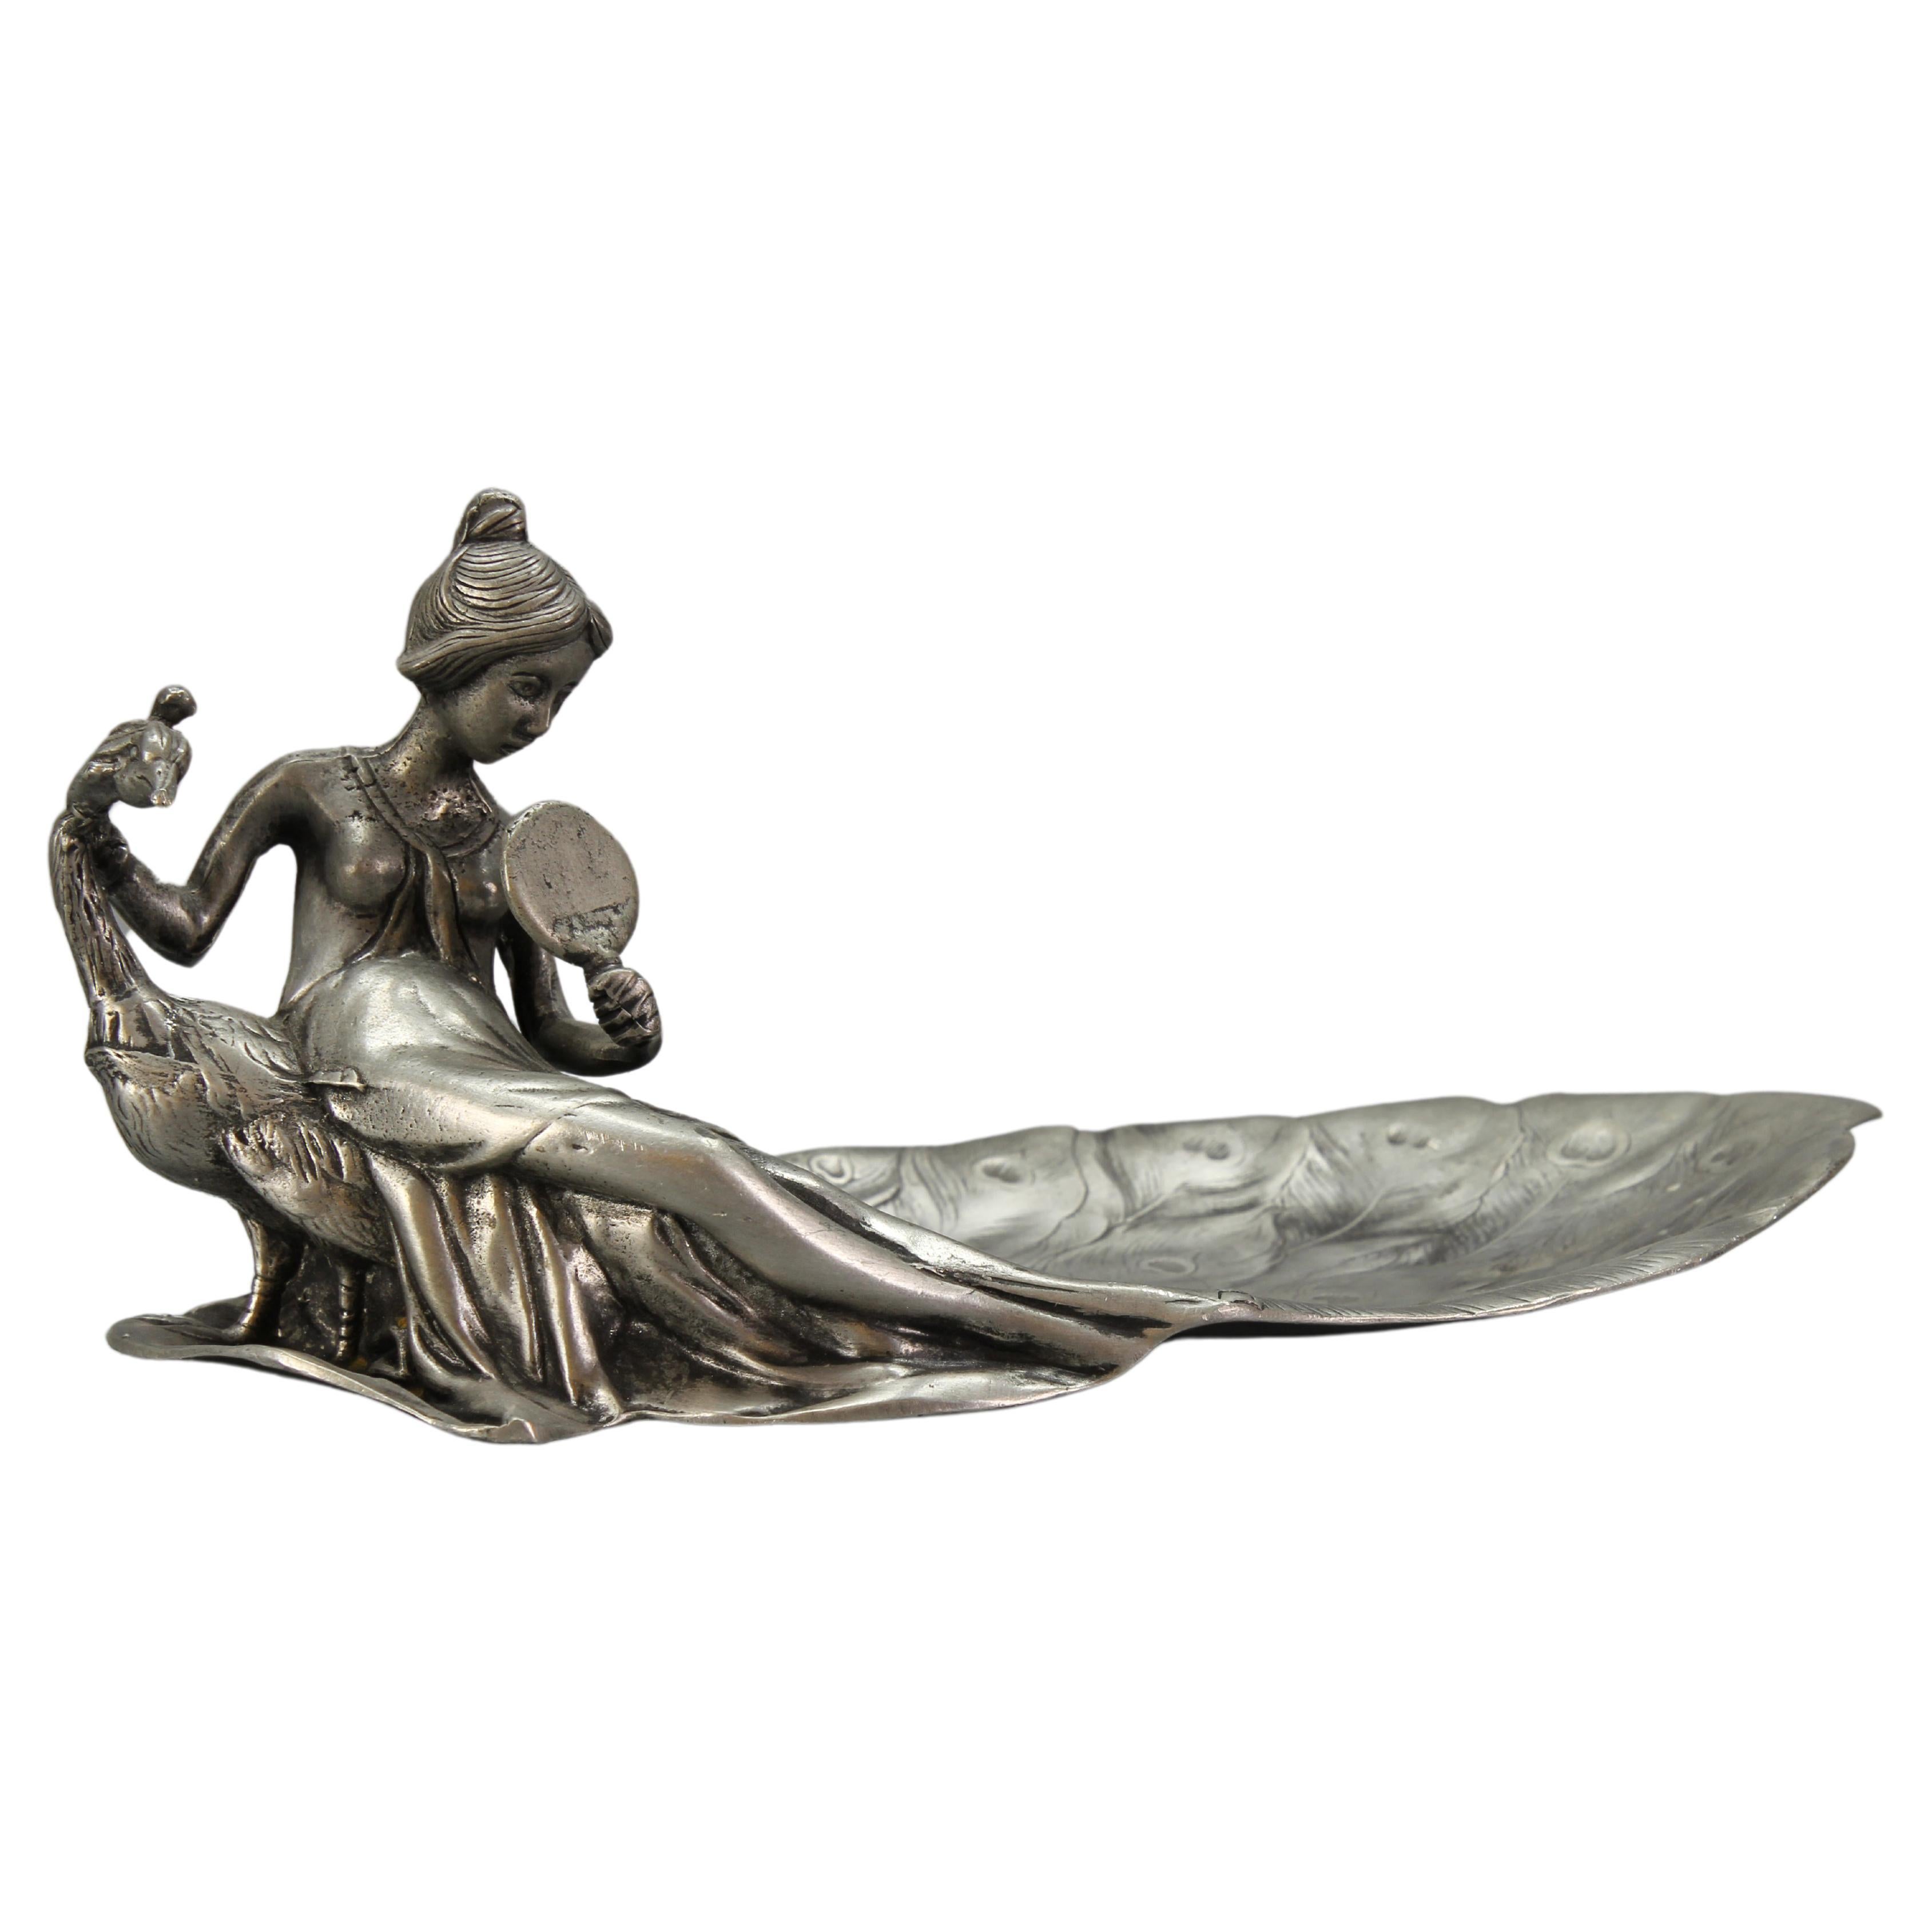 French Art Nouveau Style Pewter Vide - Poche or Pin Tray a Lady with a Peacock For Sale